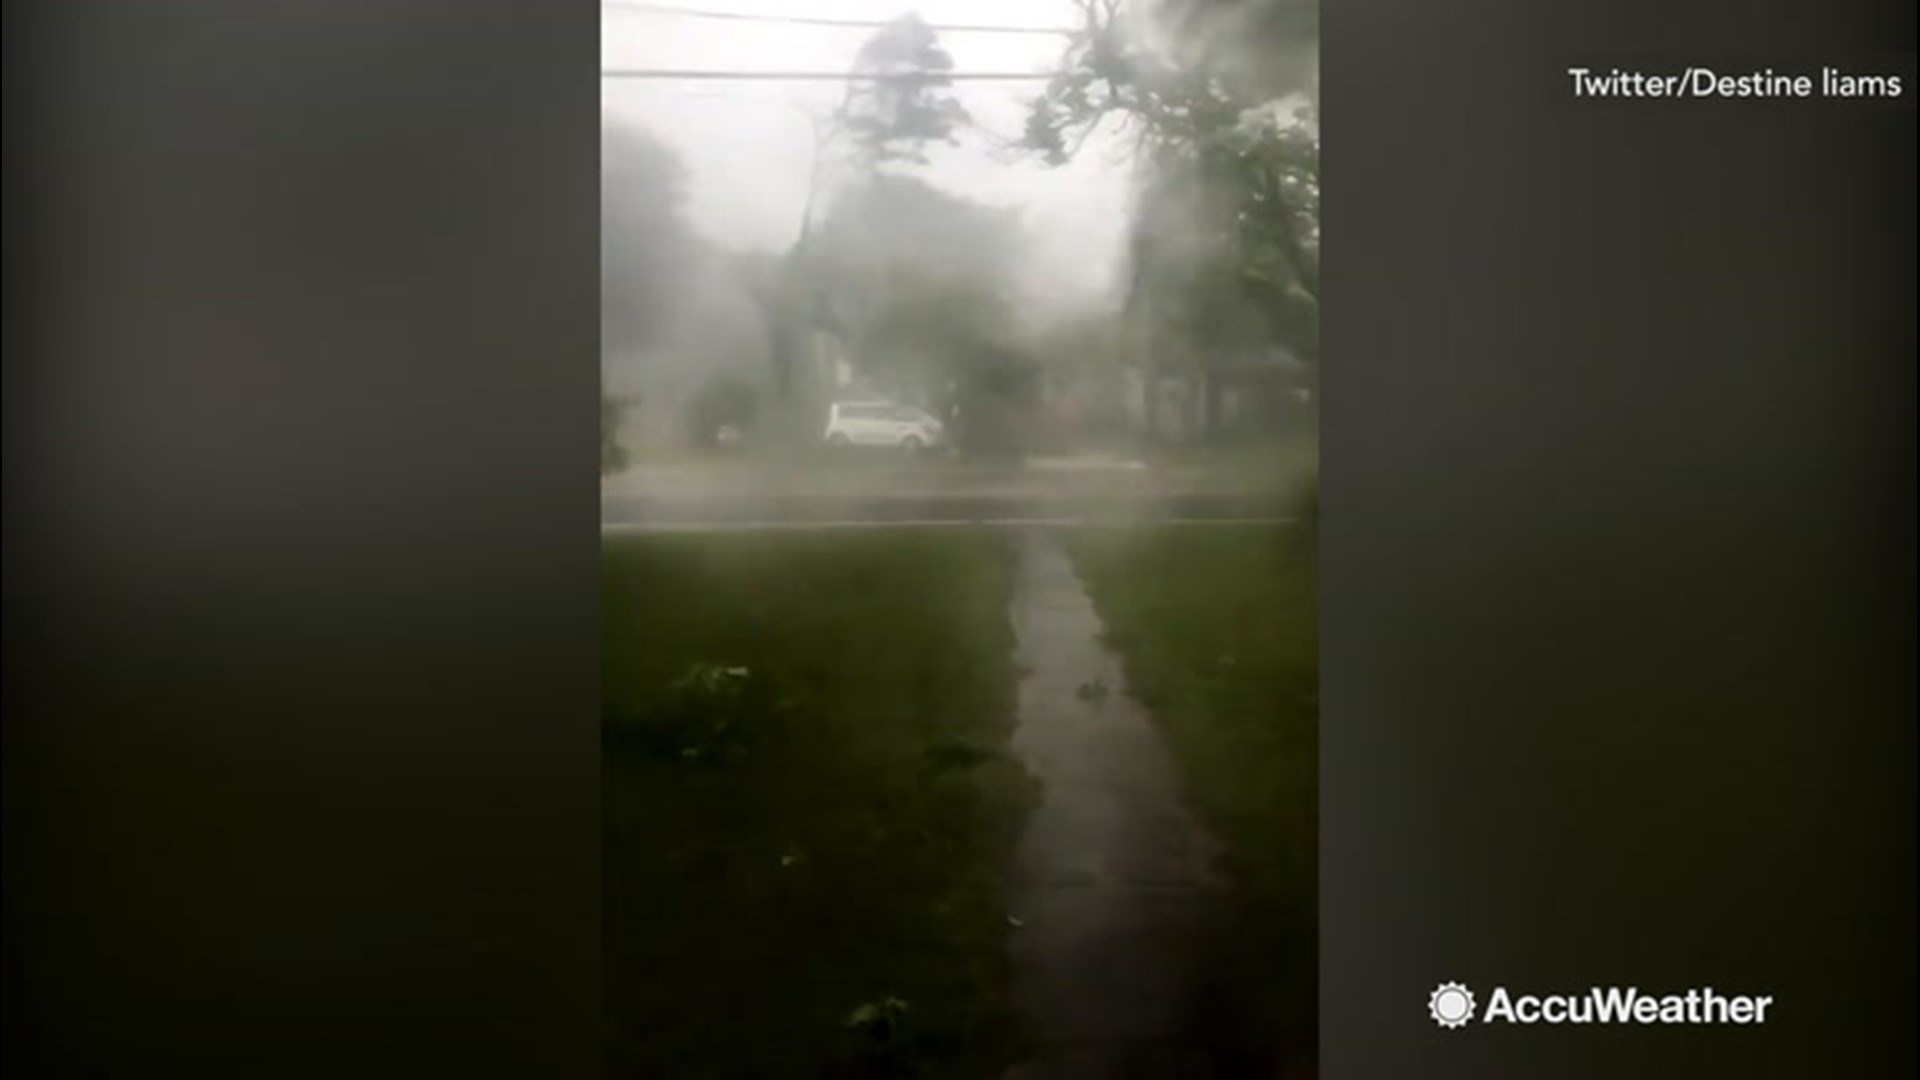 More people are experiencing and taking footage of severe weather as the day goes on in Massachusetts, this time in West Dennis. The National Weather Service has confirmed a tornado touching down in South Yarmouth around noon, on July 23.